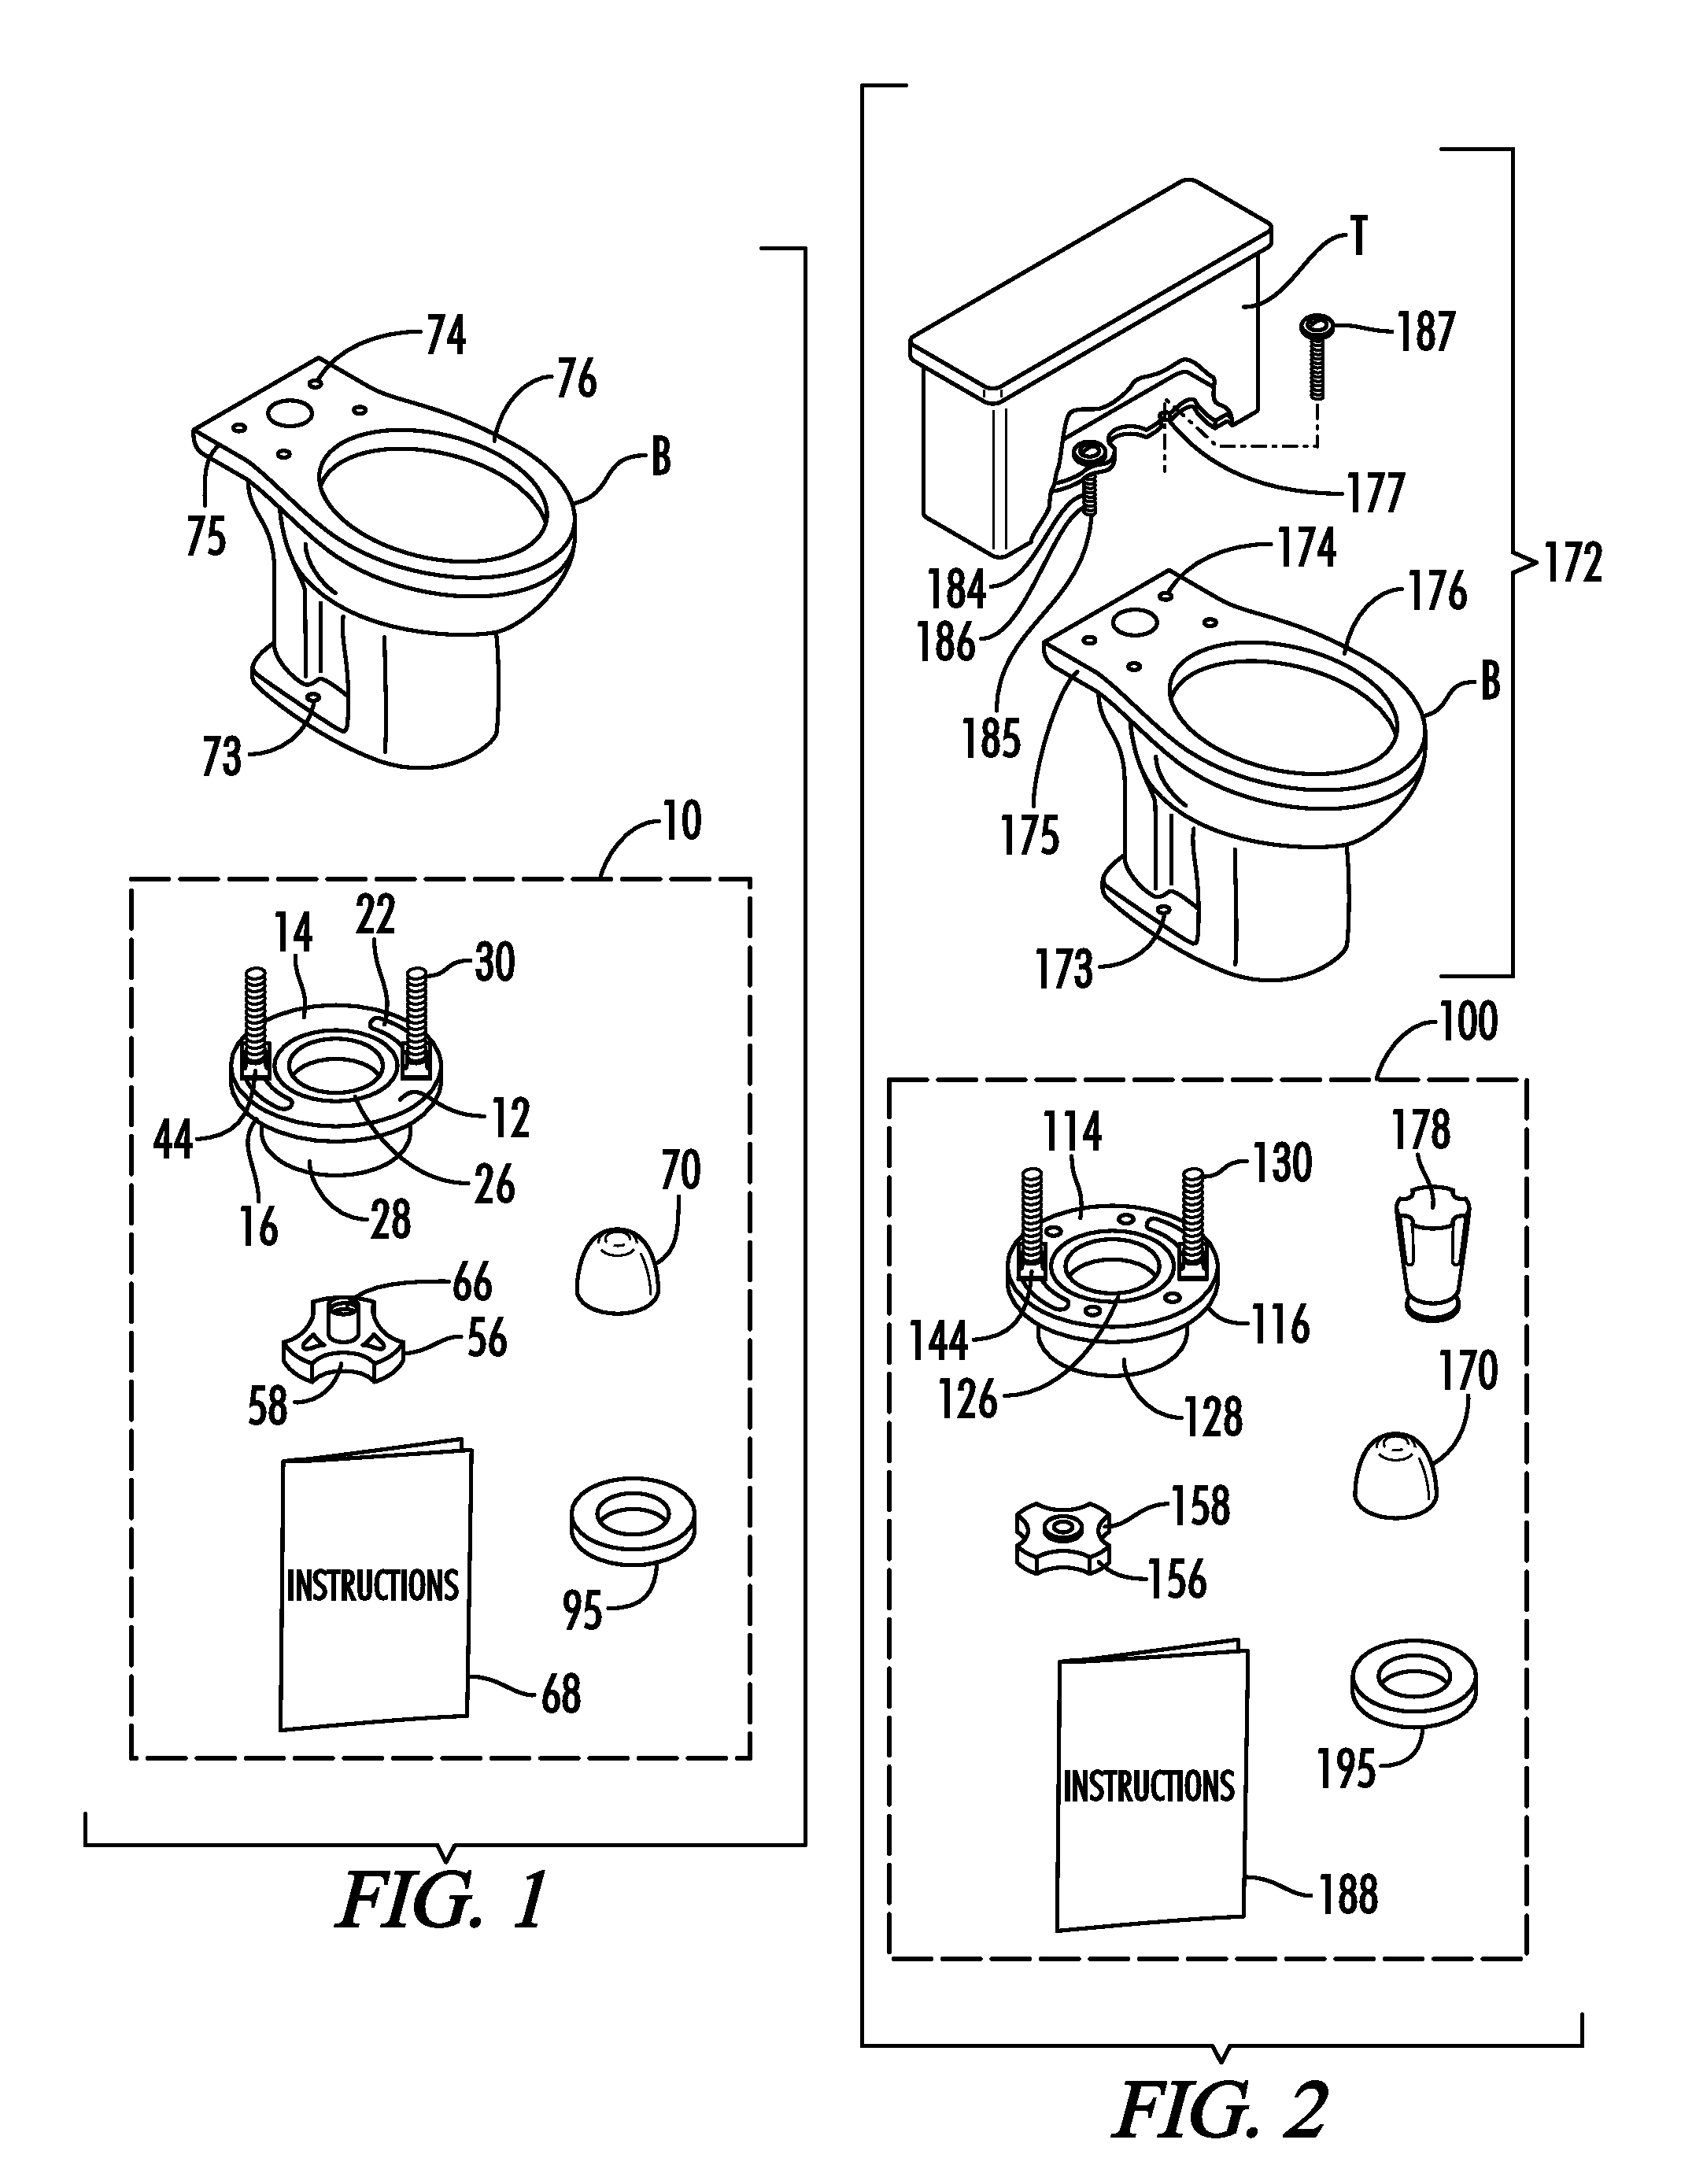 Kits, Assemblies and Methods for No-Tools Toilet Installation